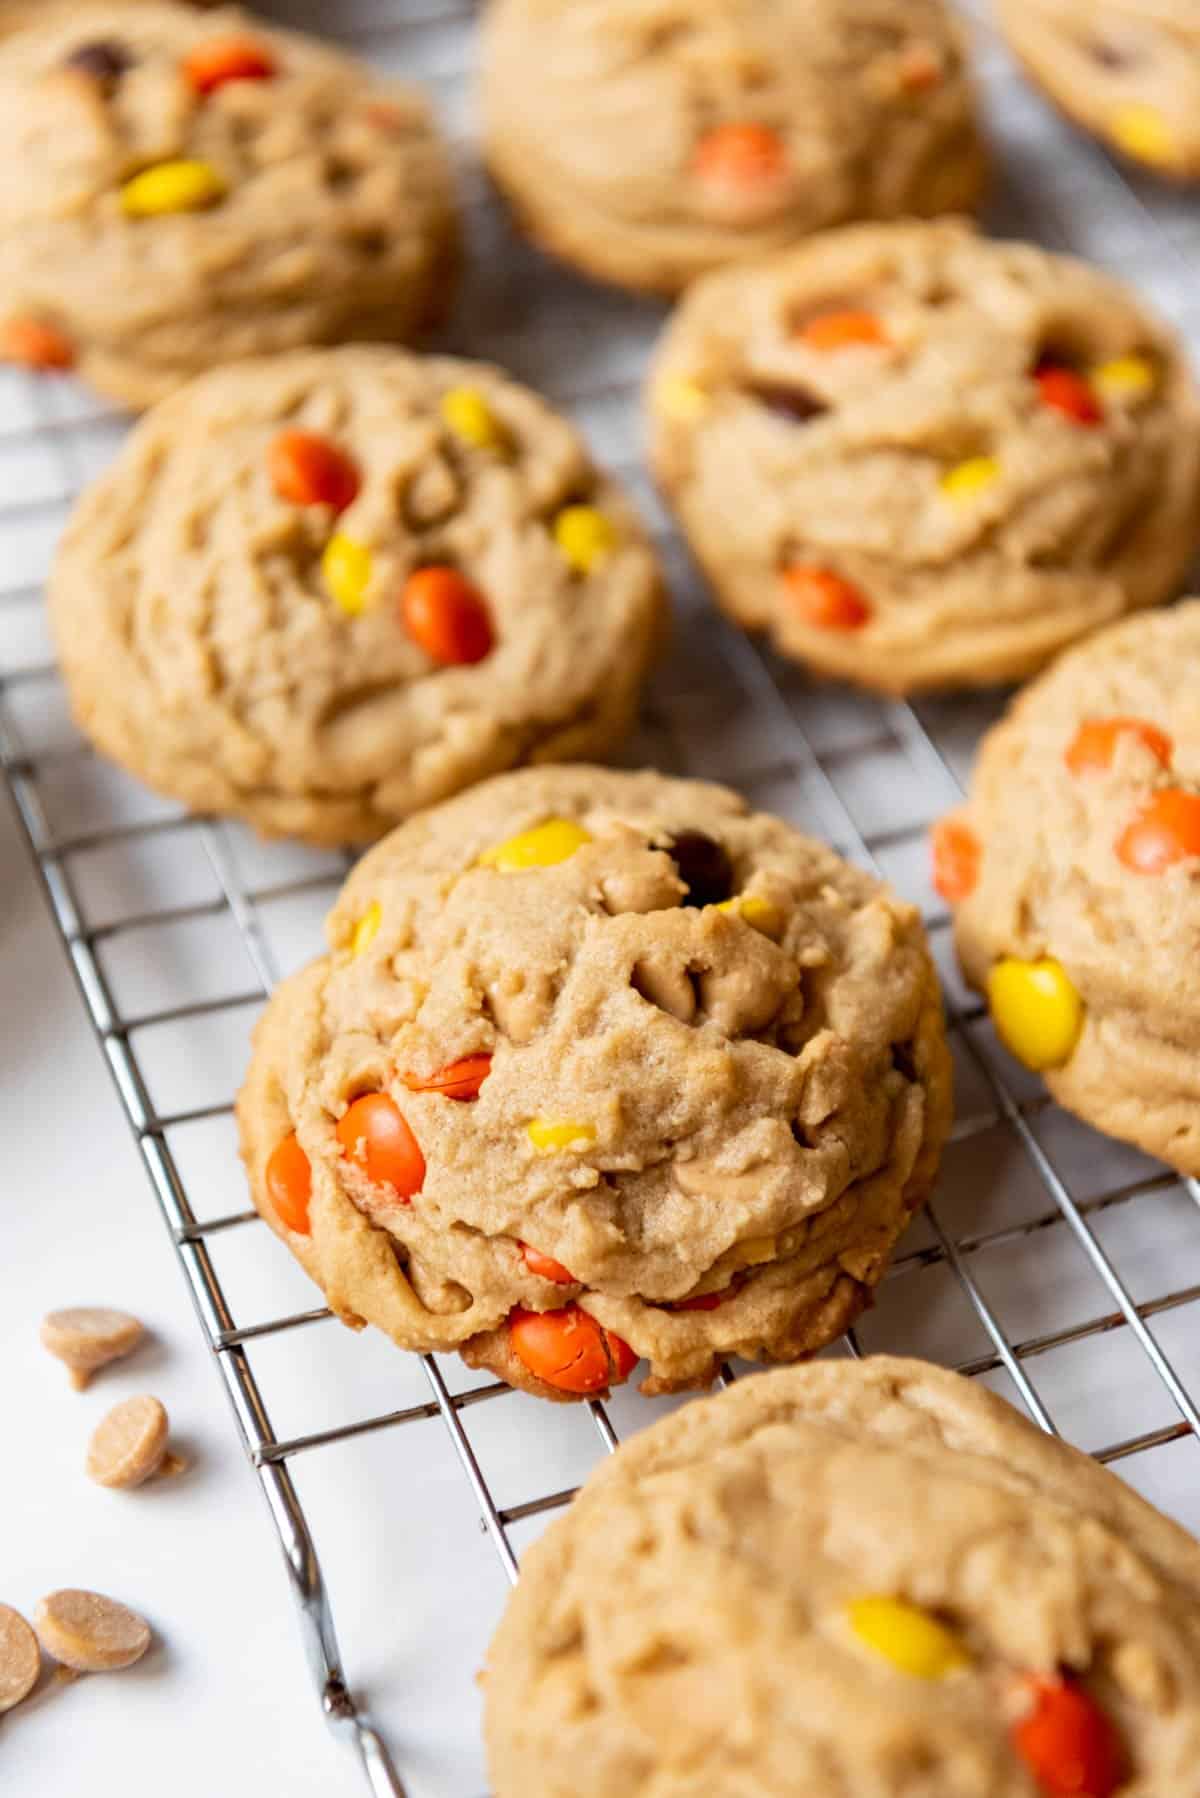 A close image of thick peanut butter cookies with Reese's Pieces.